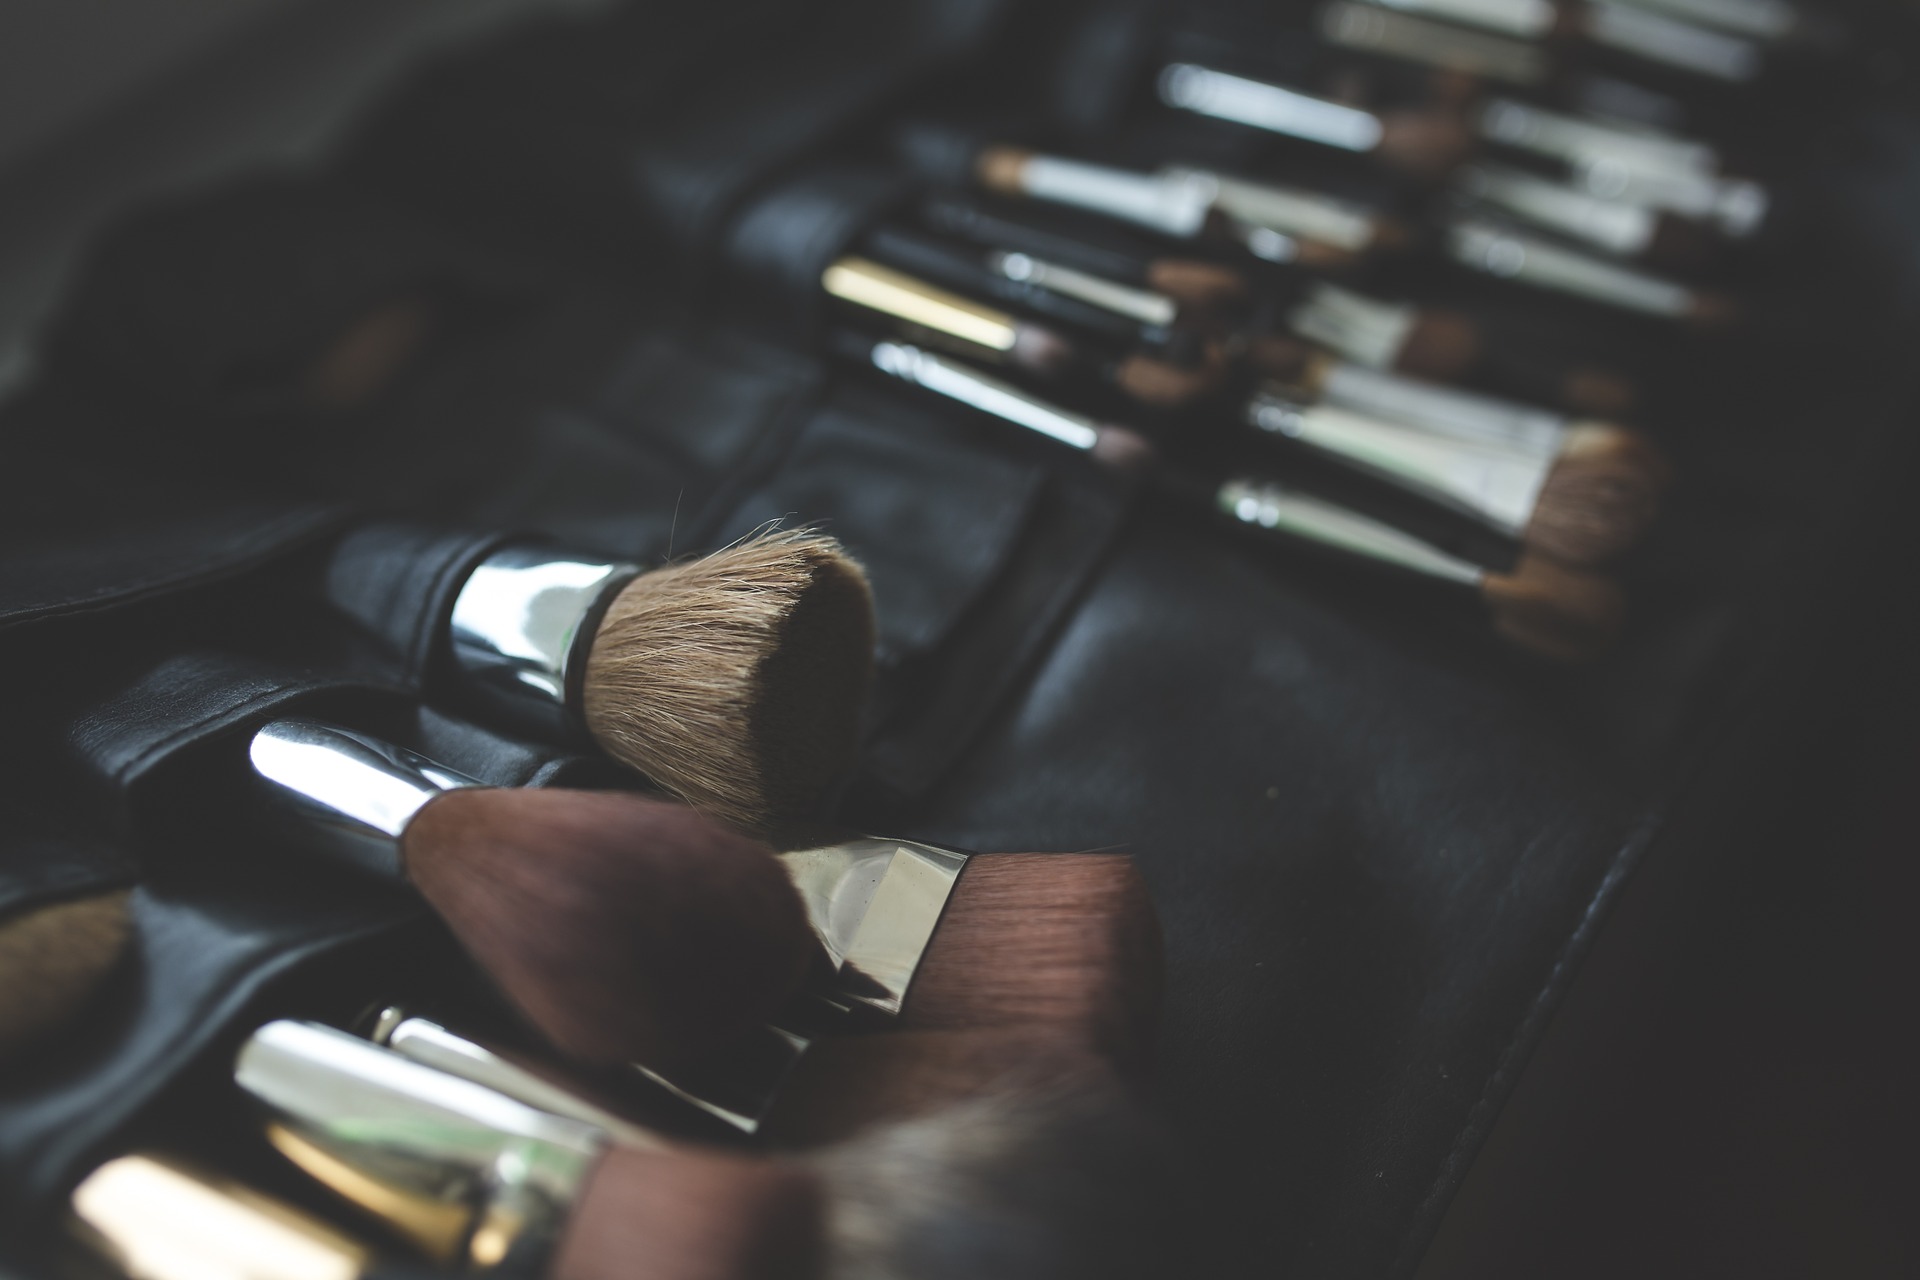 cleaning makeup brushes - 3 simple & easy ways